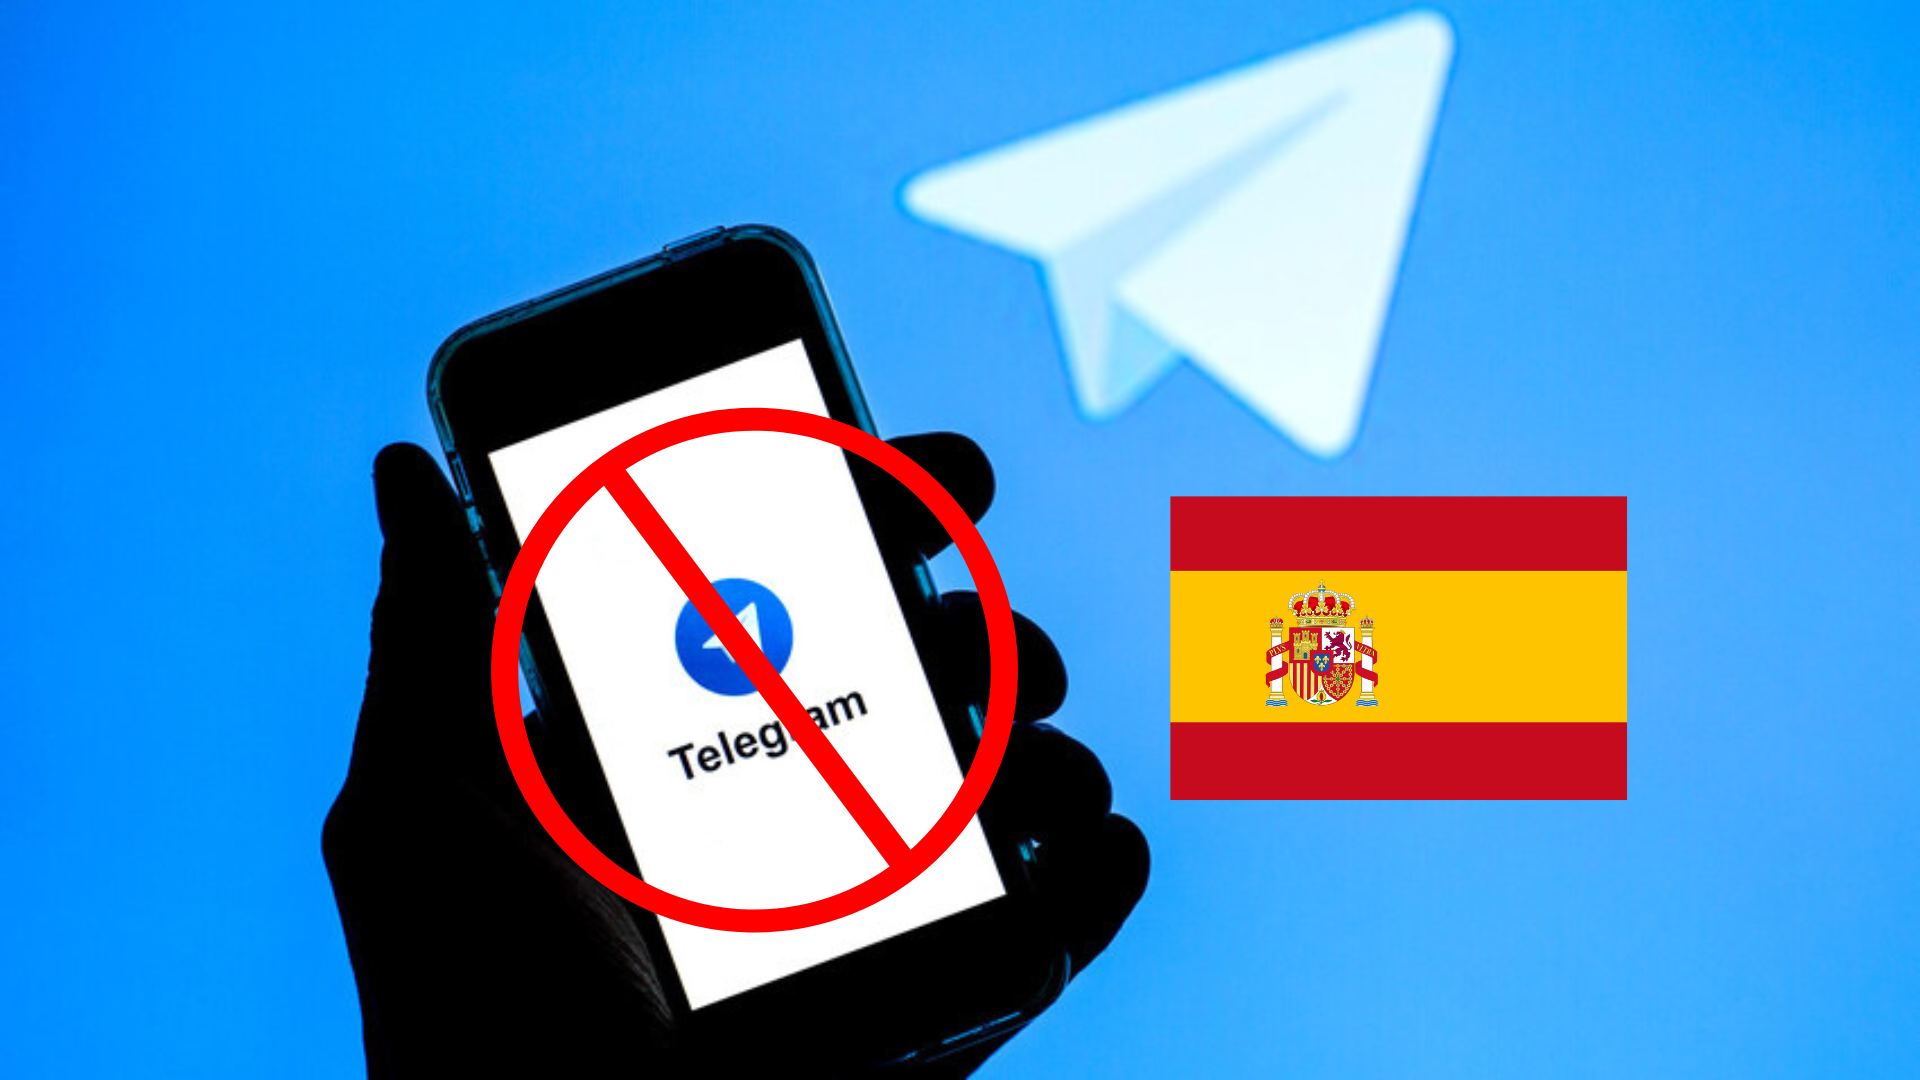 Spain’s High Court Orders to Block Telegram for Security Measures